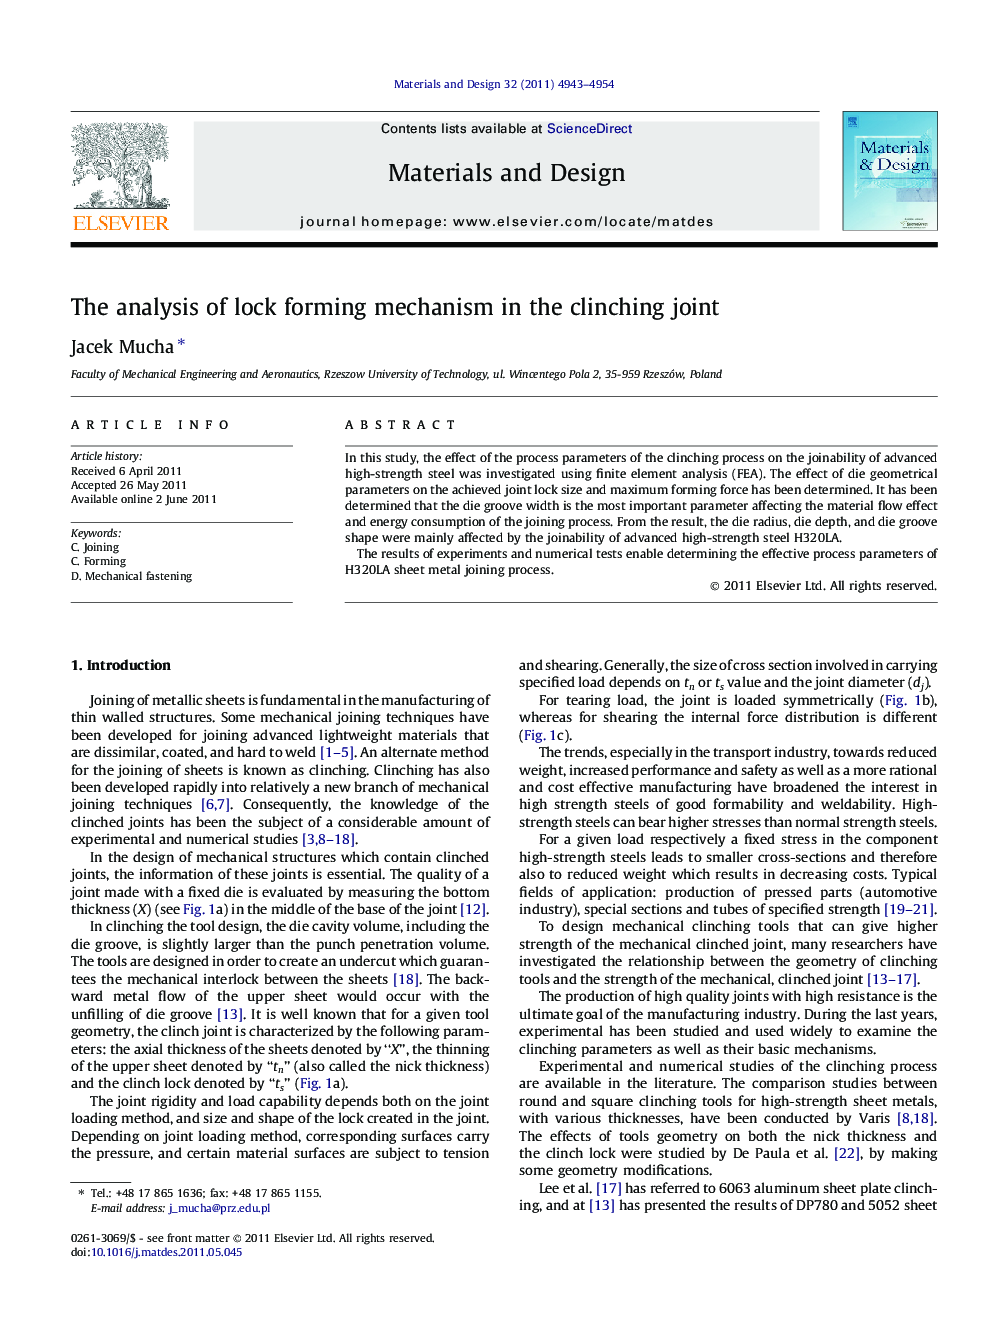 The analysis of lock forming mechanism in the clinching joint